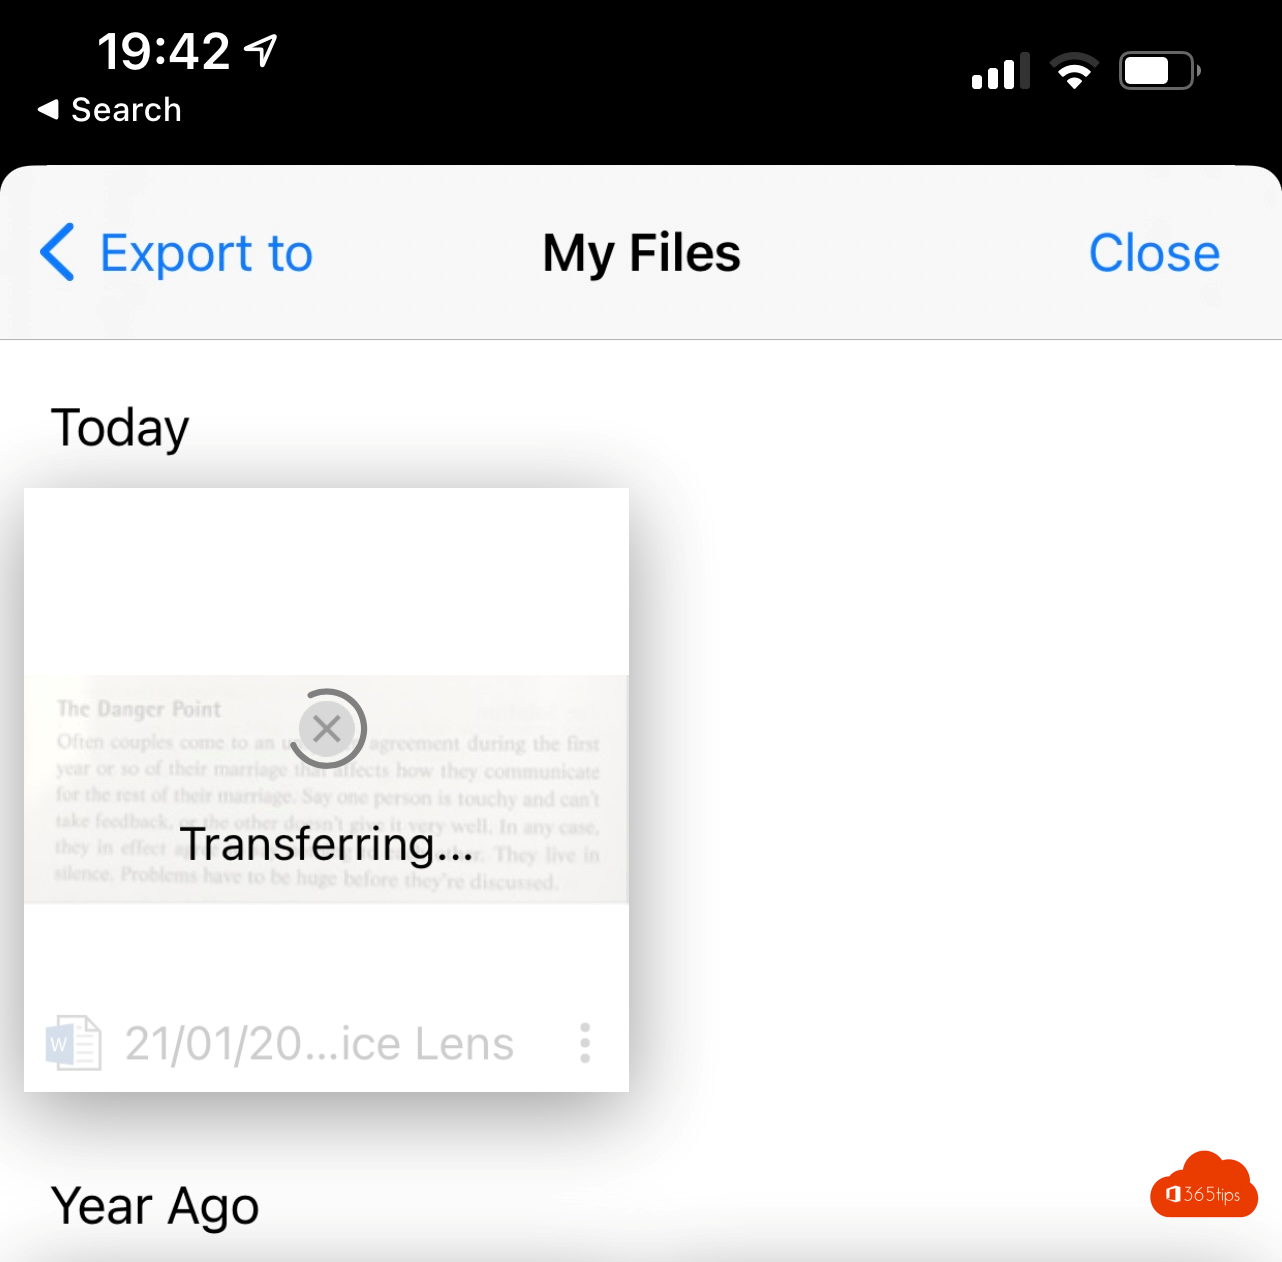 How to convert a document to an editable document in Office Lens (OCR)